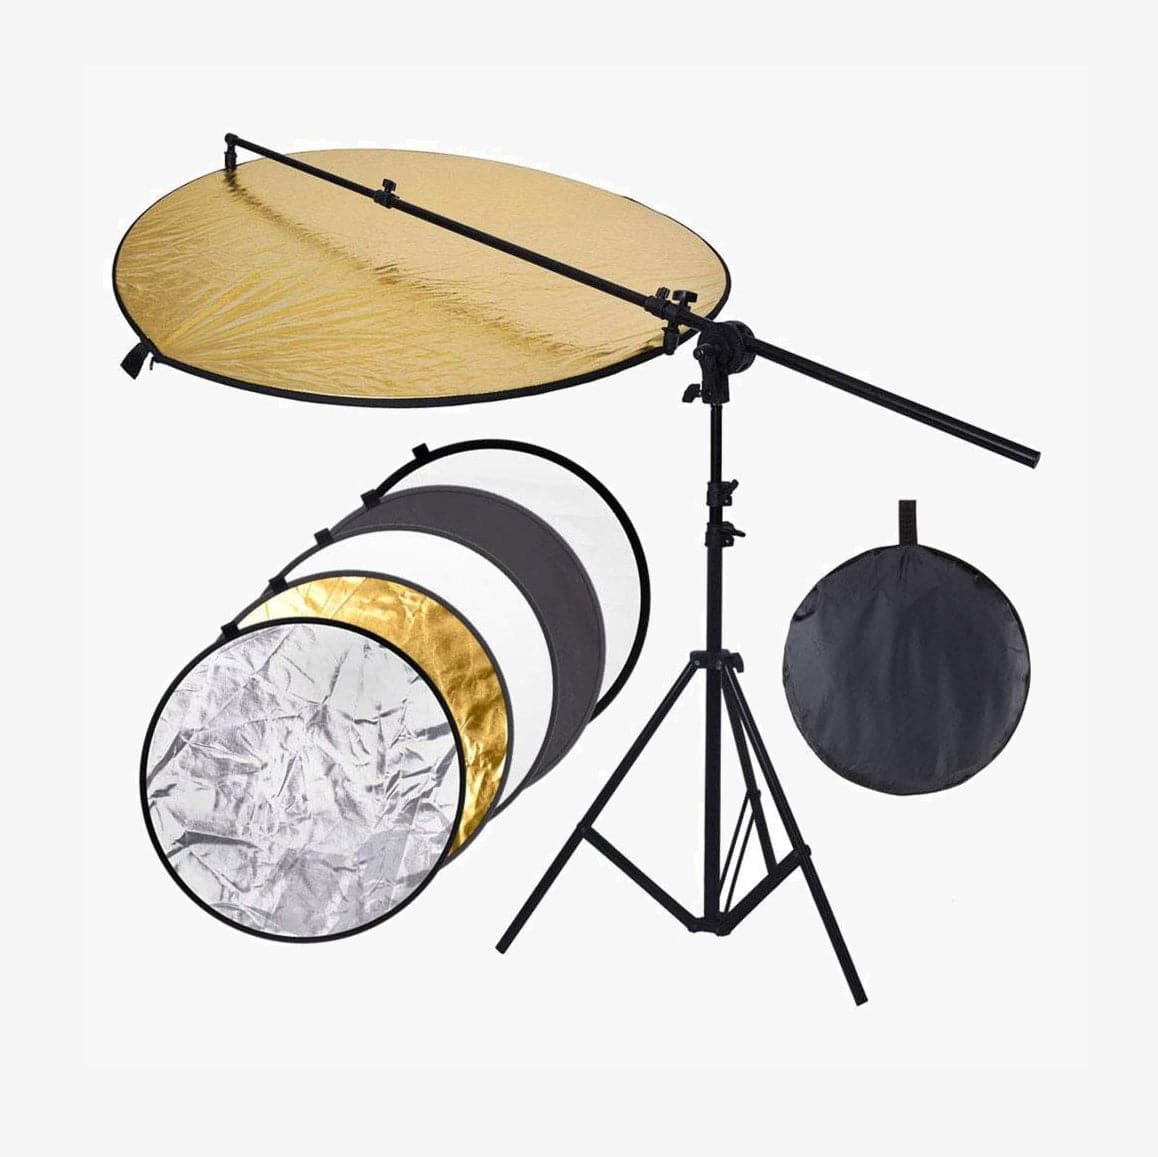 80cm 5 in 1 Reflector With Stand and Boom Arm Kit